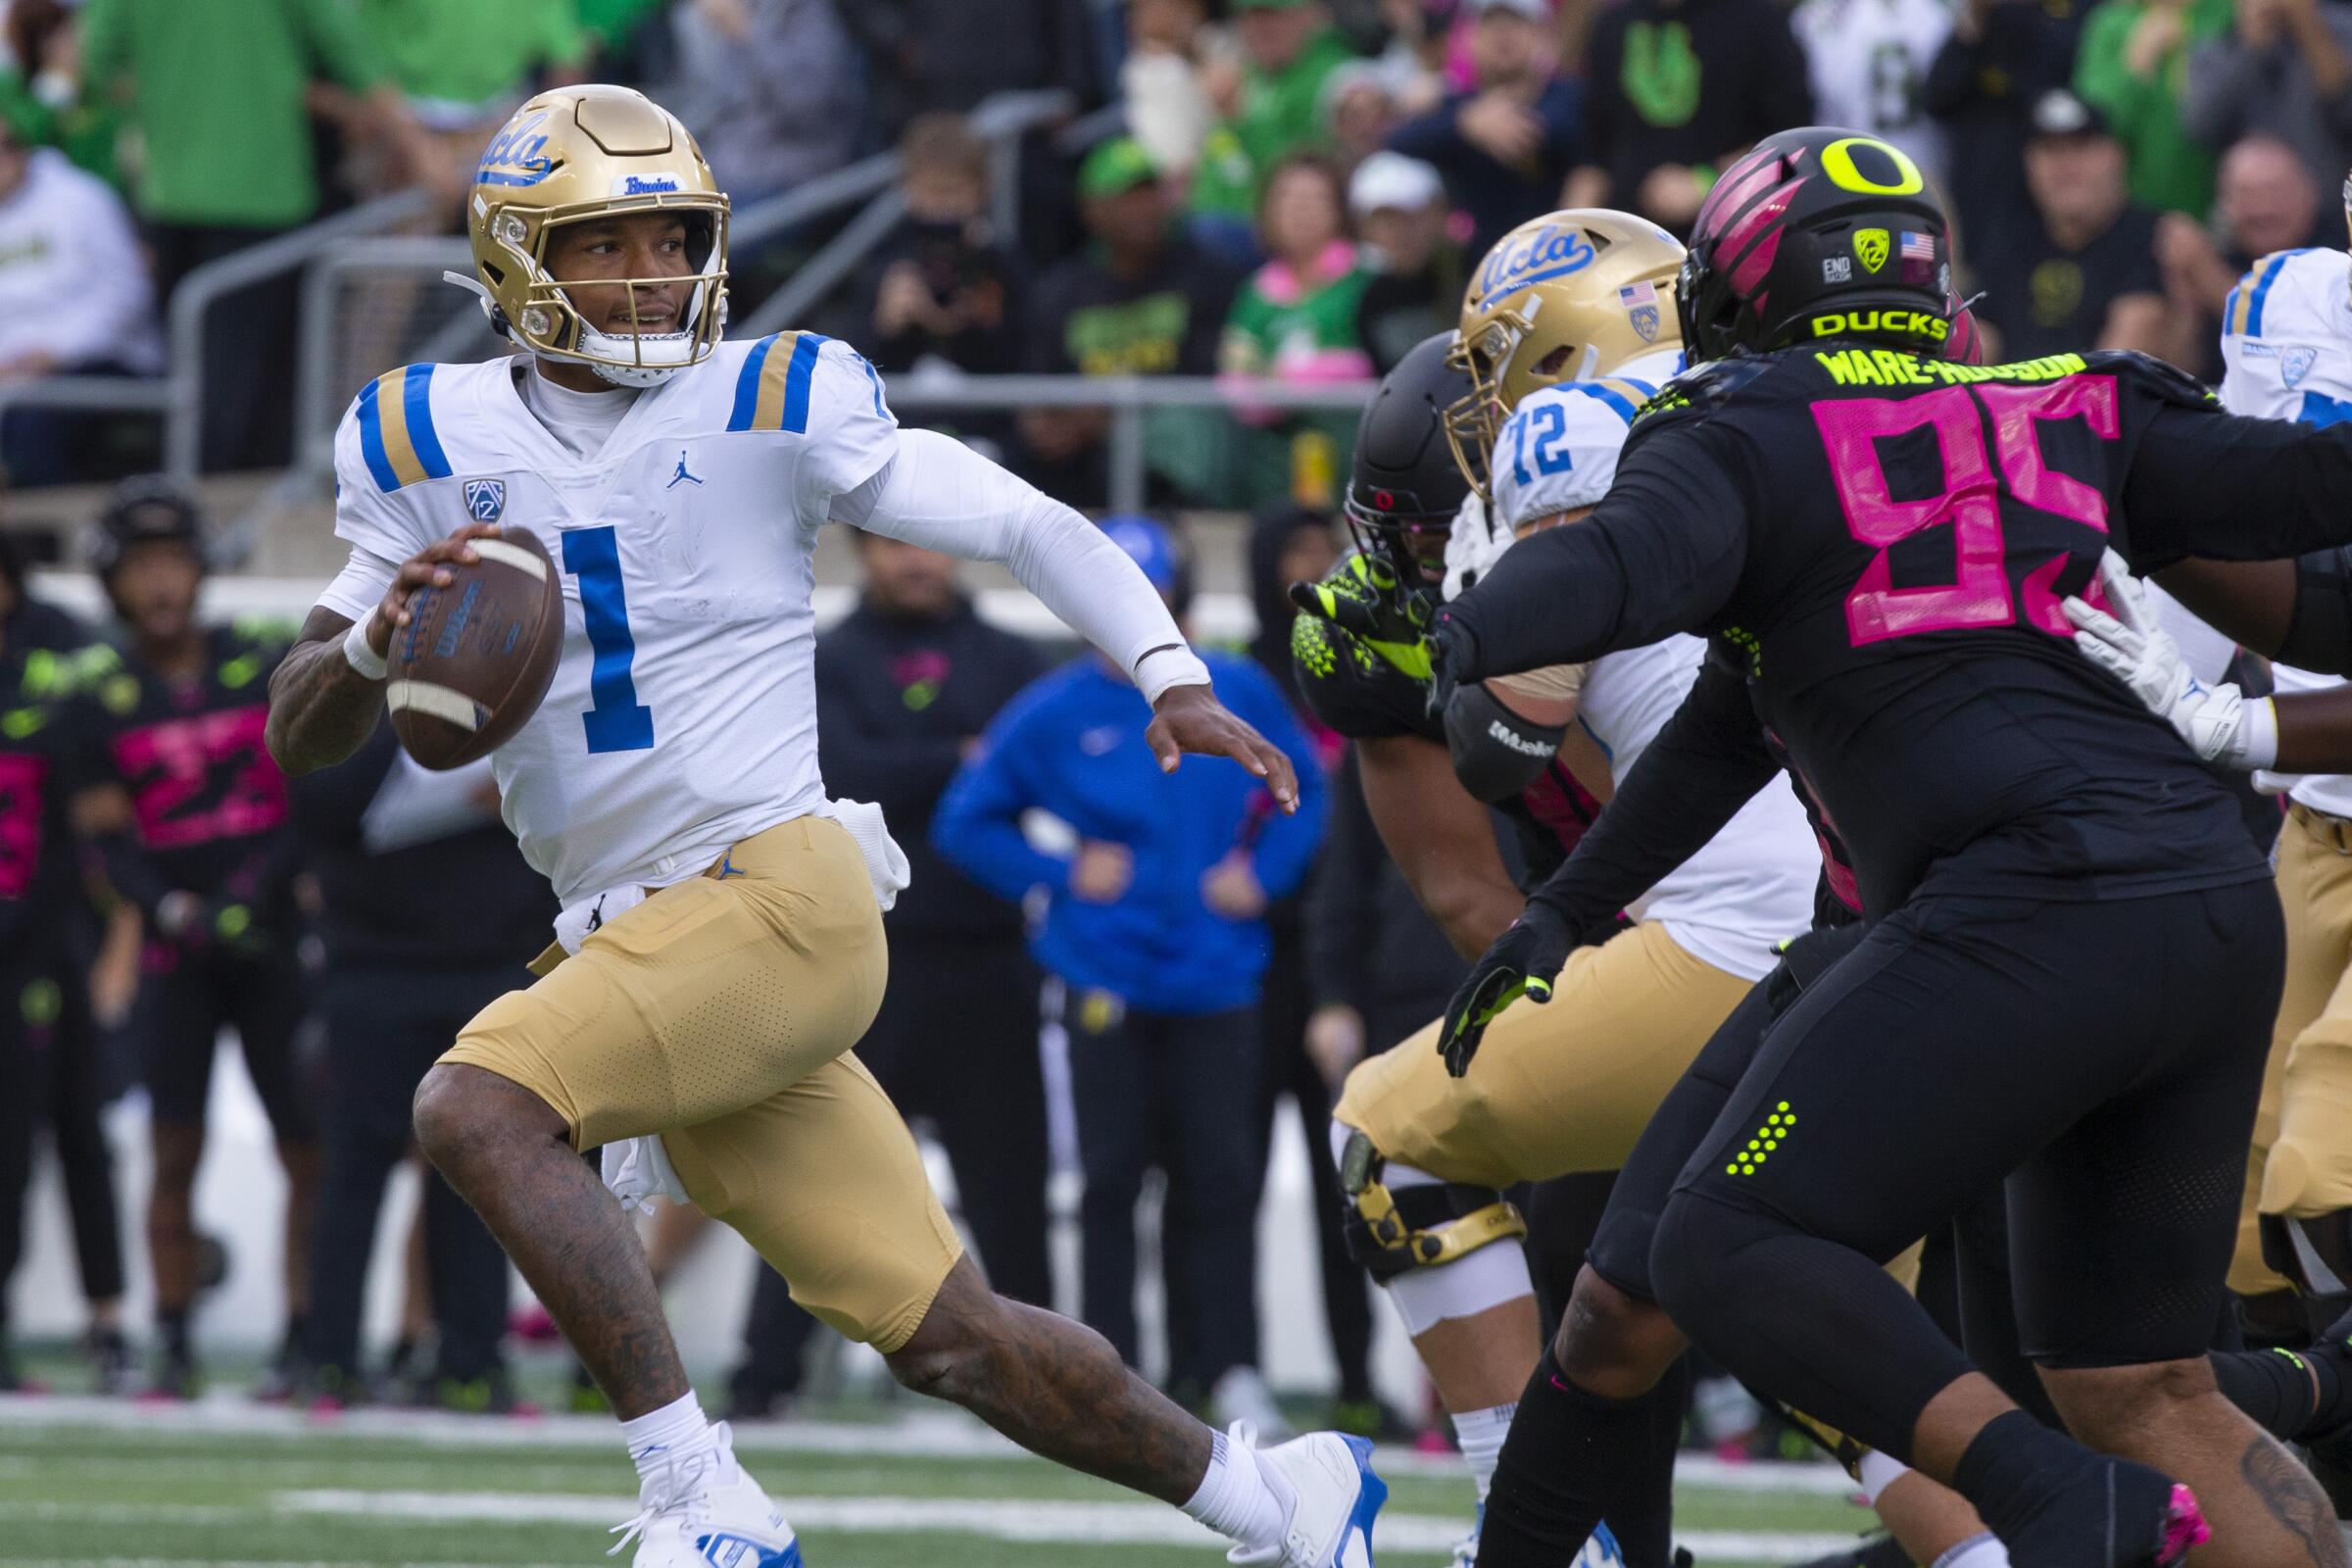 UCLA 's Dorian Thompson-Robinson runs out of the pocket under pressure from the Oregon defense.